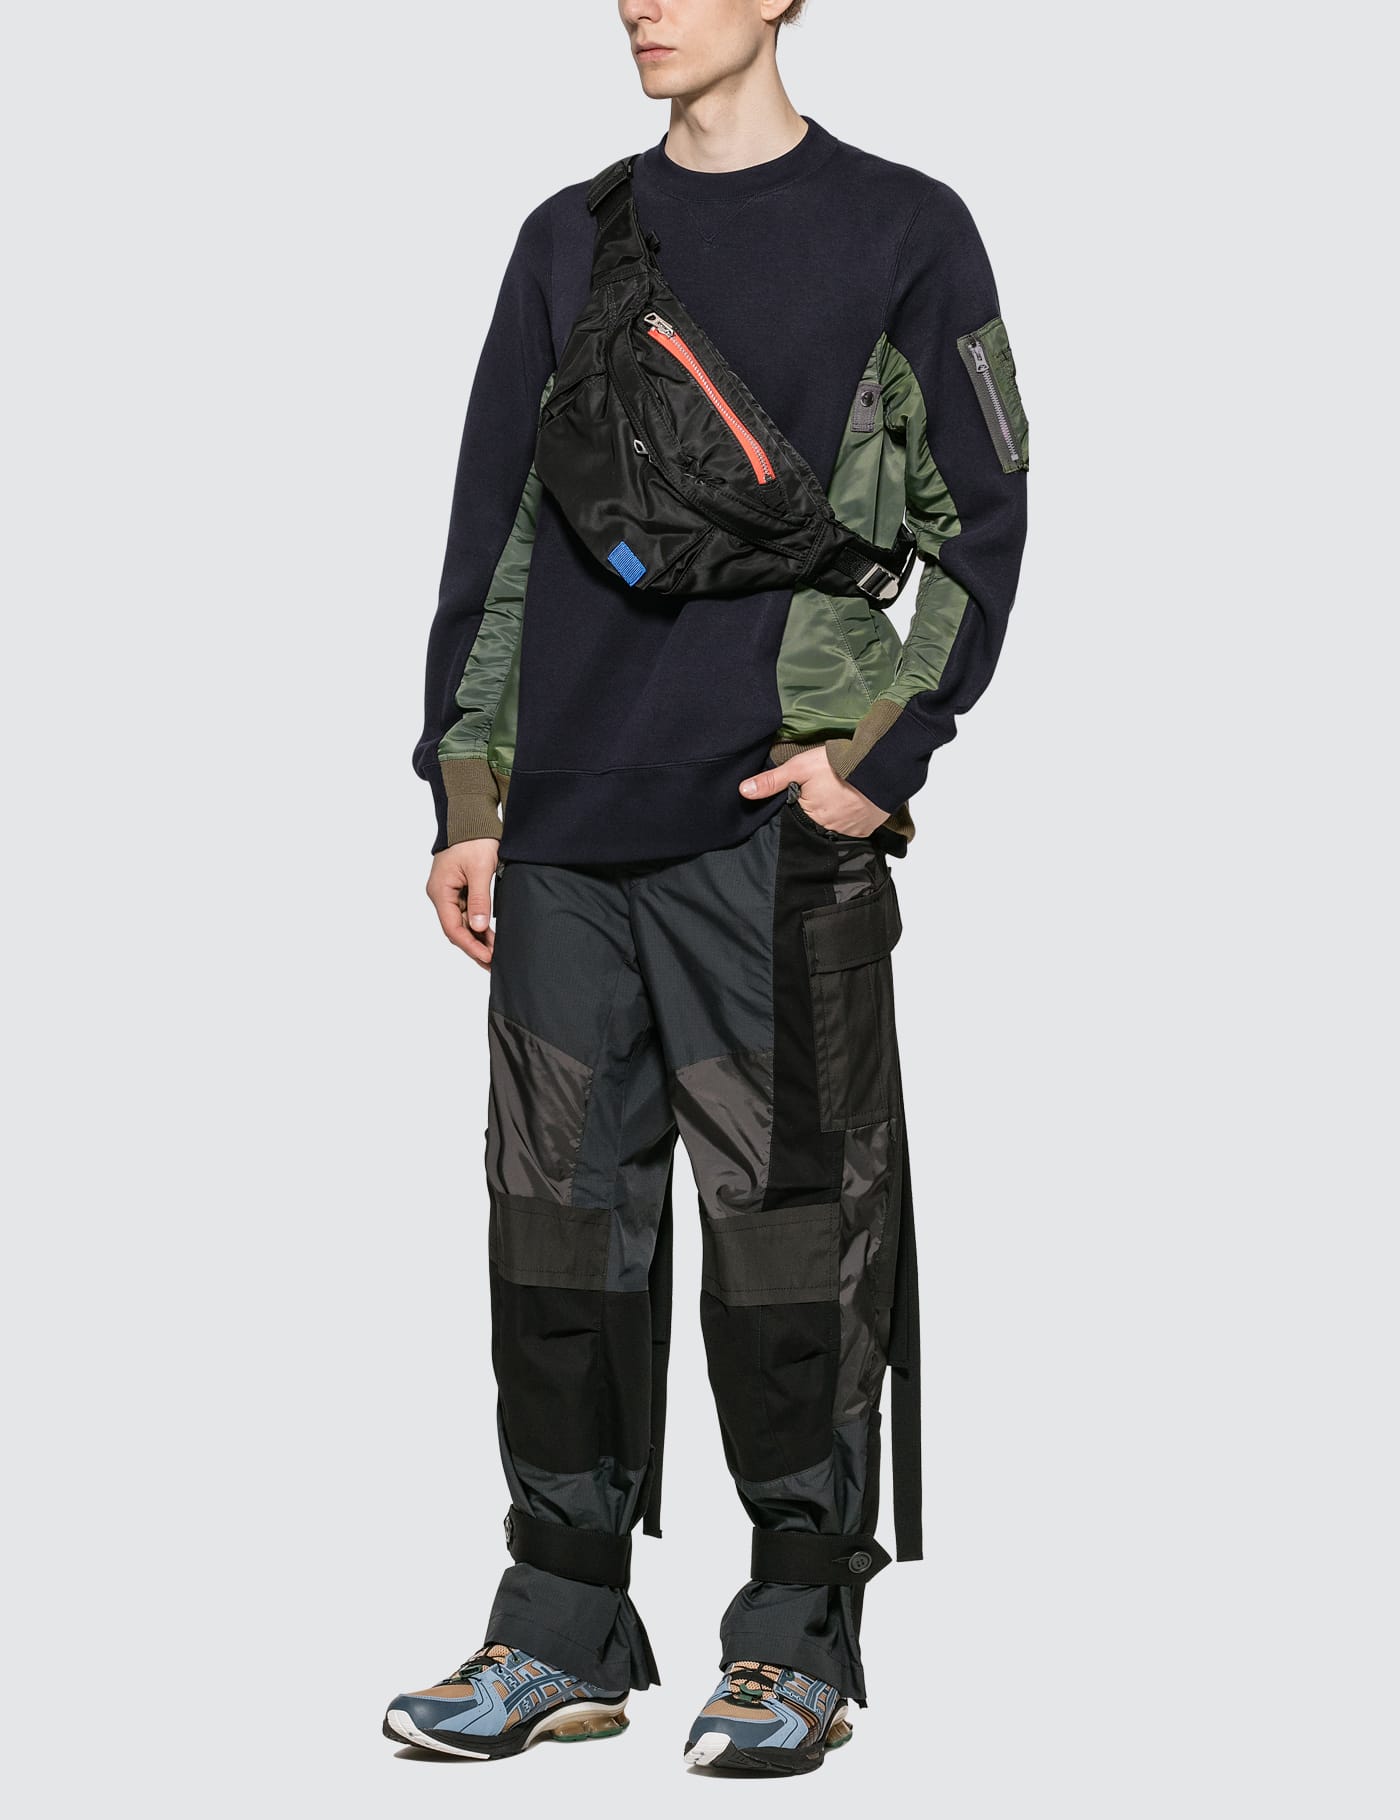 Sacai - Fabric Combo Pants | HBX - Globally Curated Fashion and Lifestyle  by Hypebeast